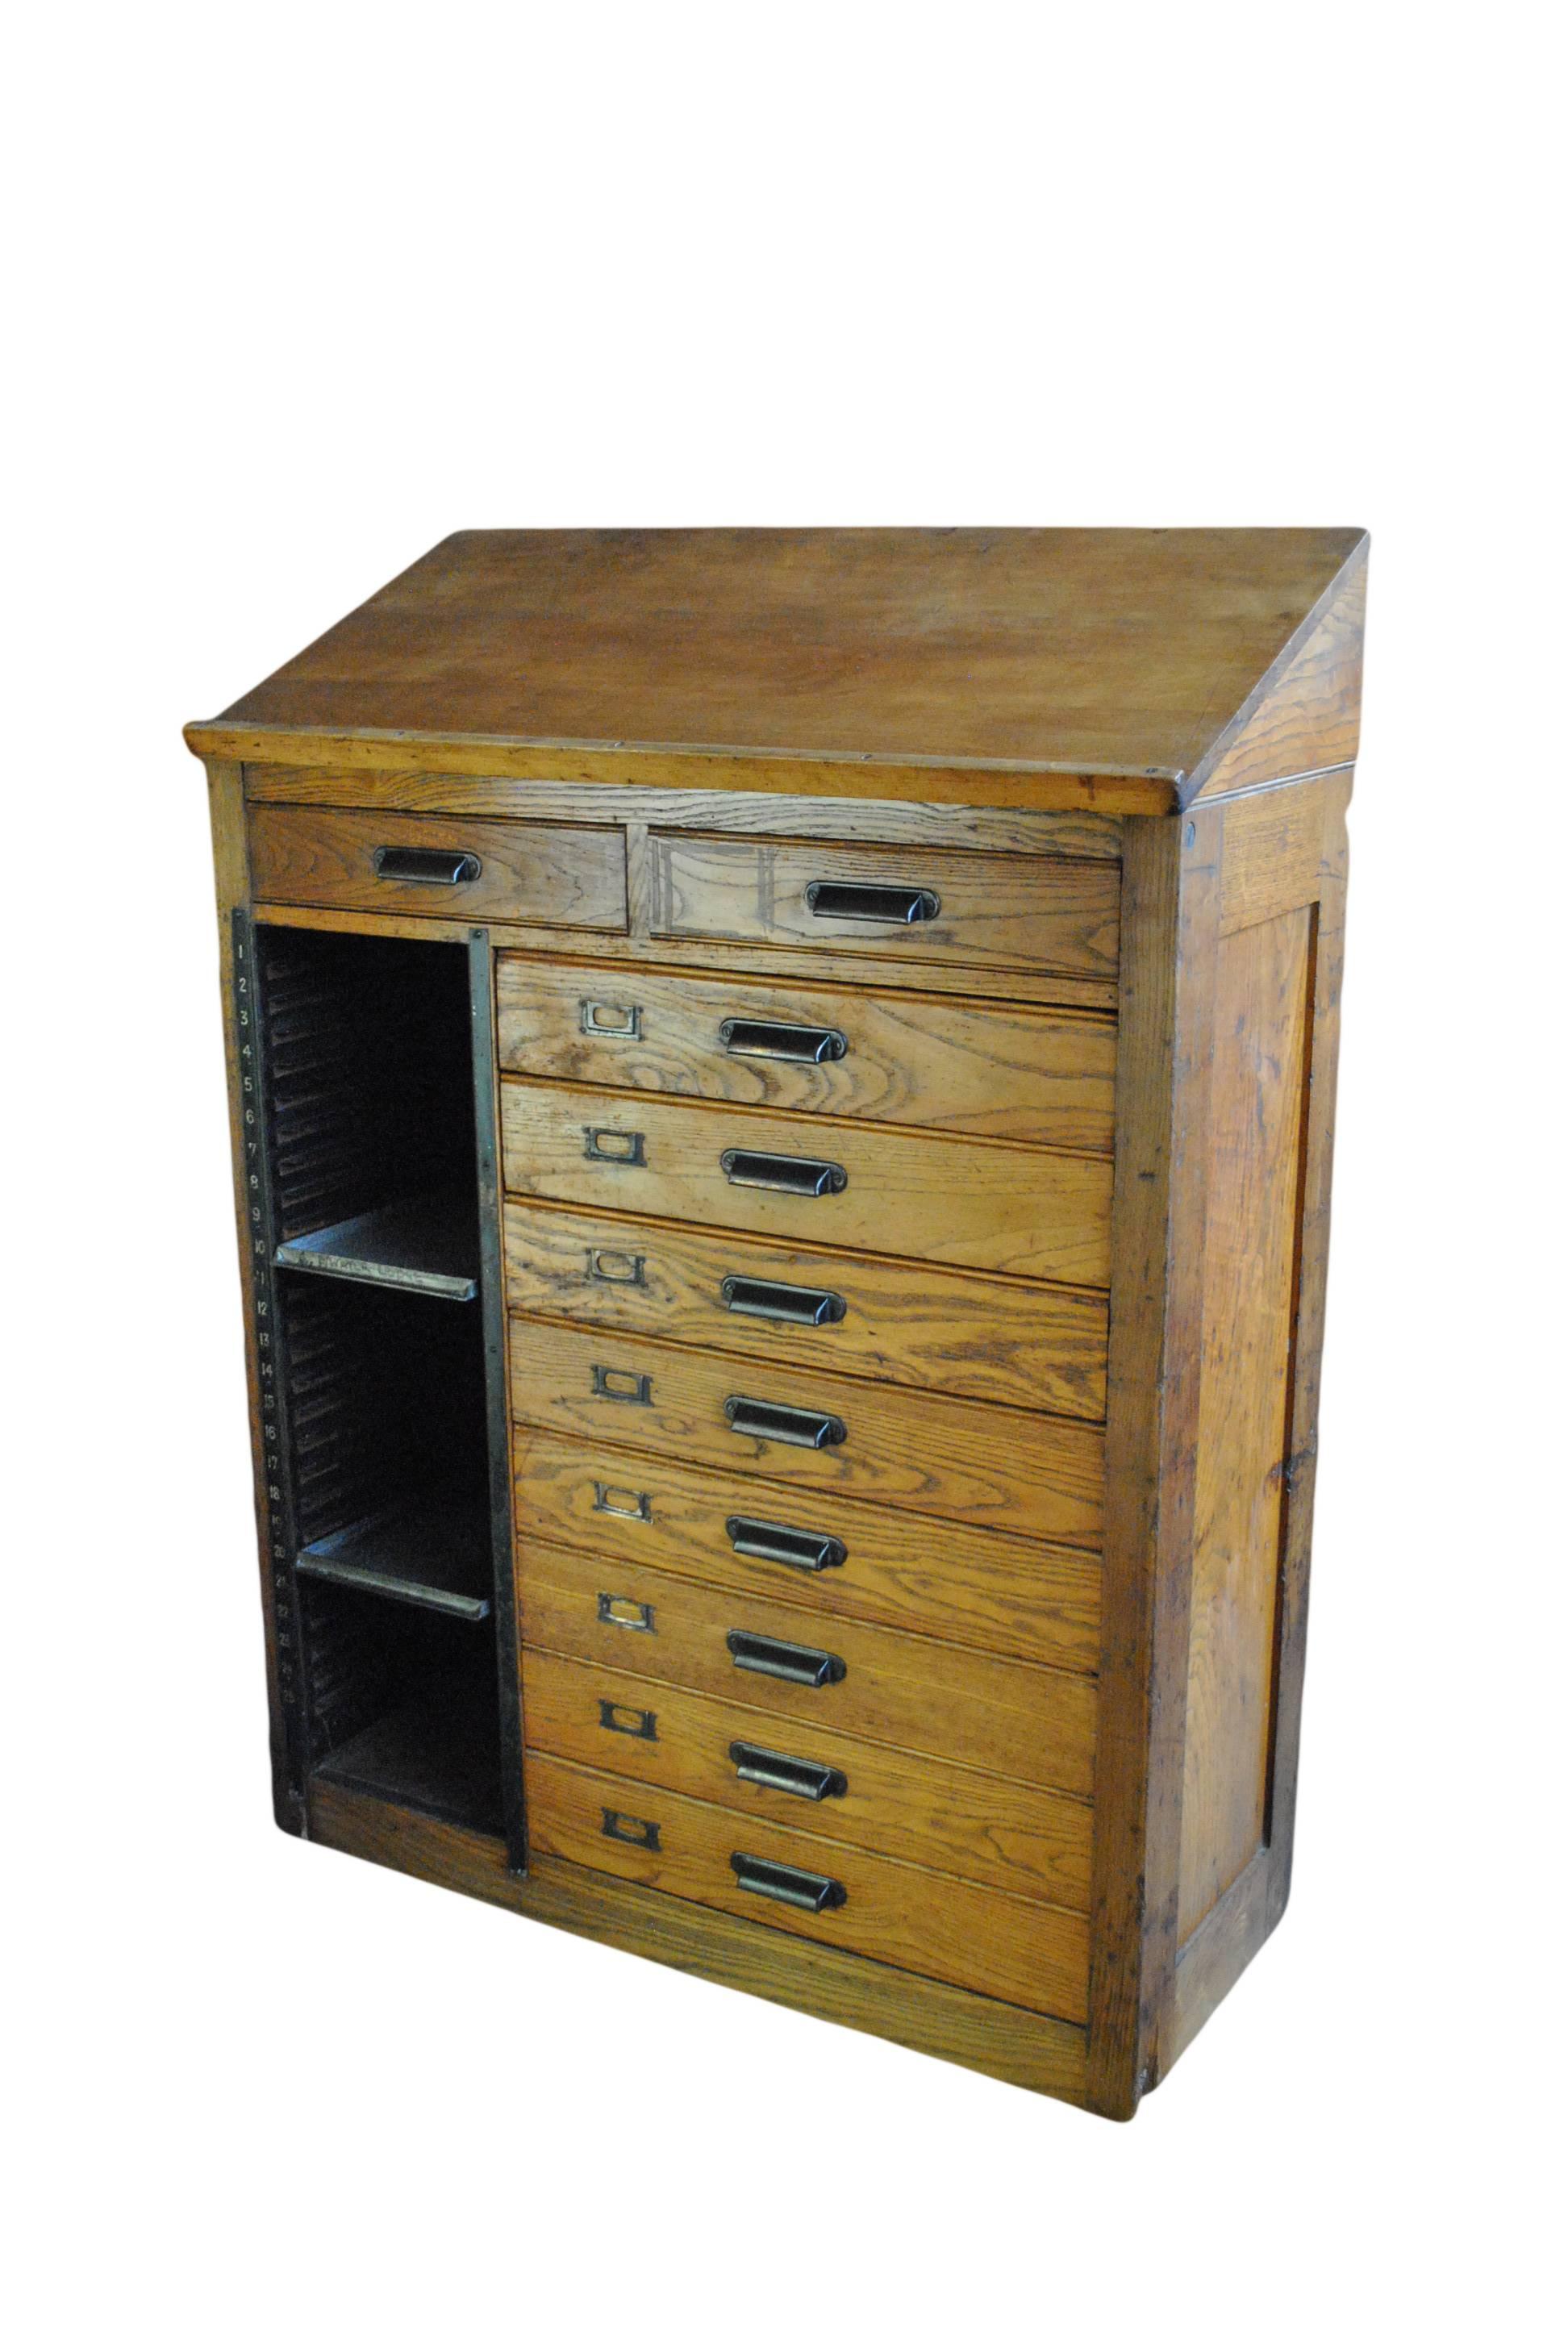 Lovely old oak typesetters cabinet, chest of drawers.
Constructed, circa 1900. Cleaned and re-waxed.
Free U.K delivery. Overseas shipping available enquire for quotes.